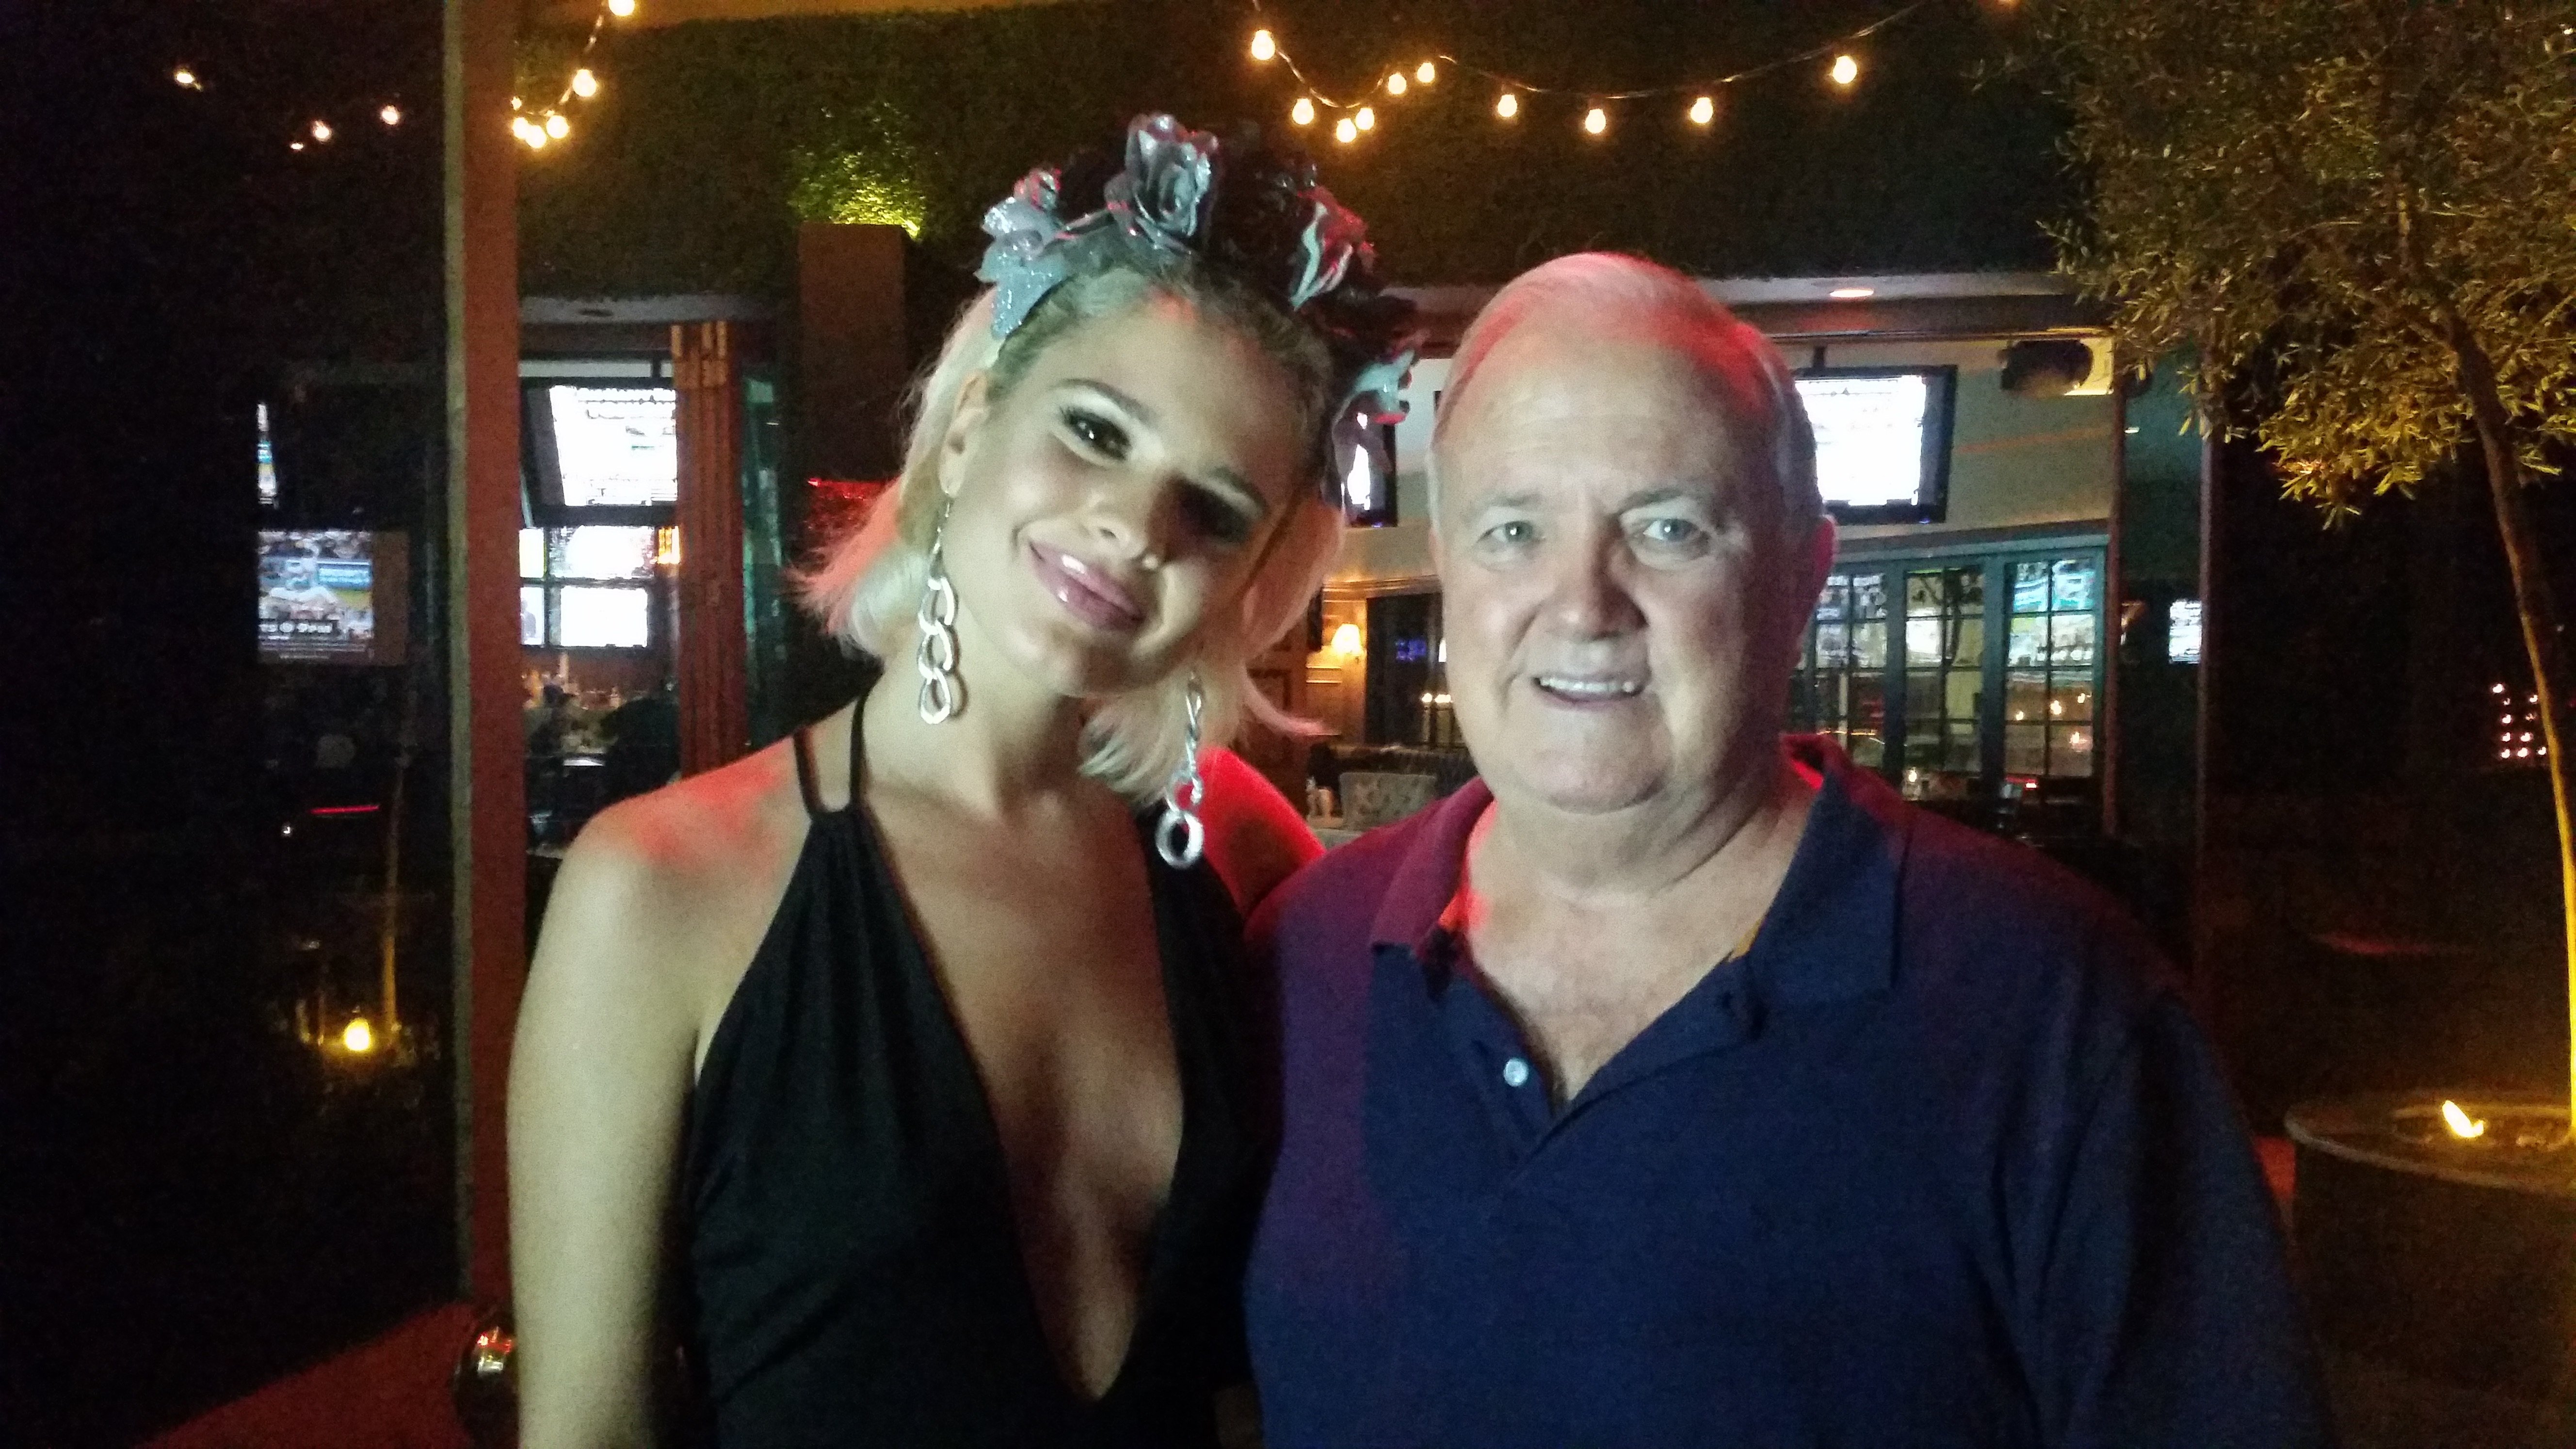 America's Next Top Model contestant Ava Capra with Don Burnett at a Reality TV Awards 2016 Launch Event.